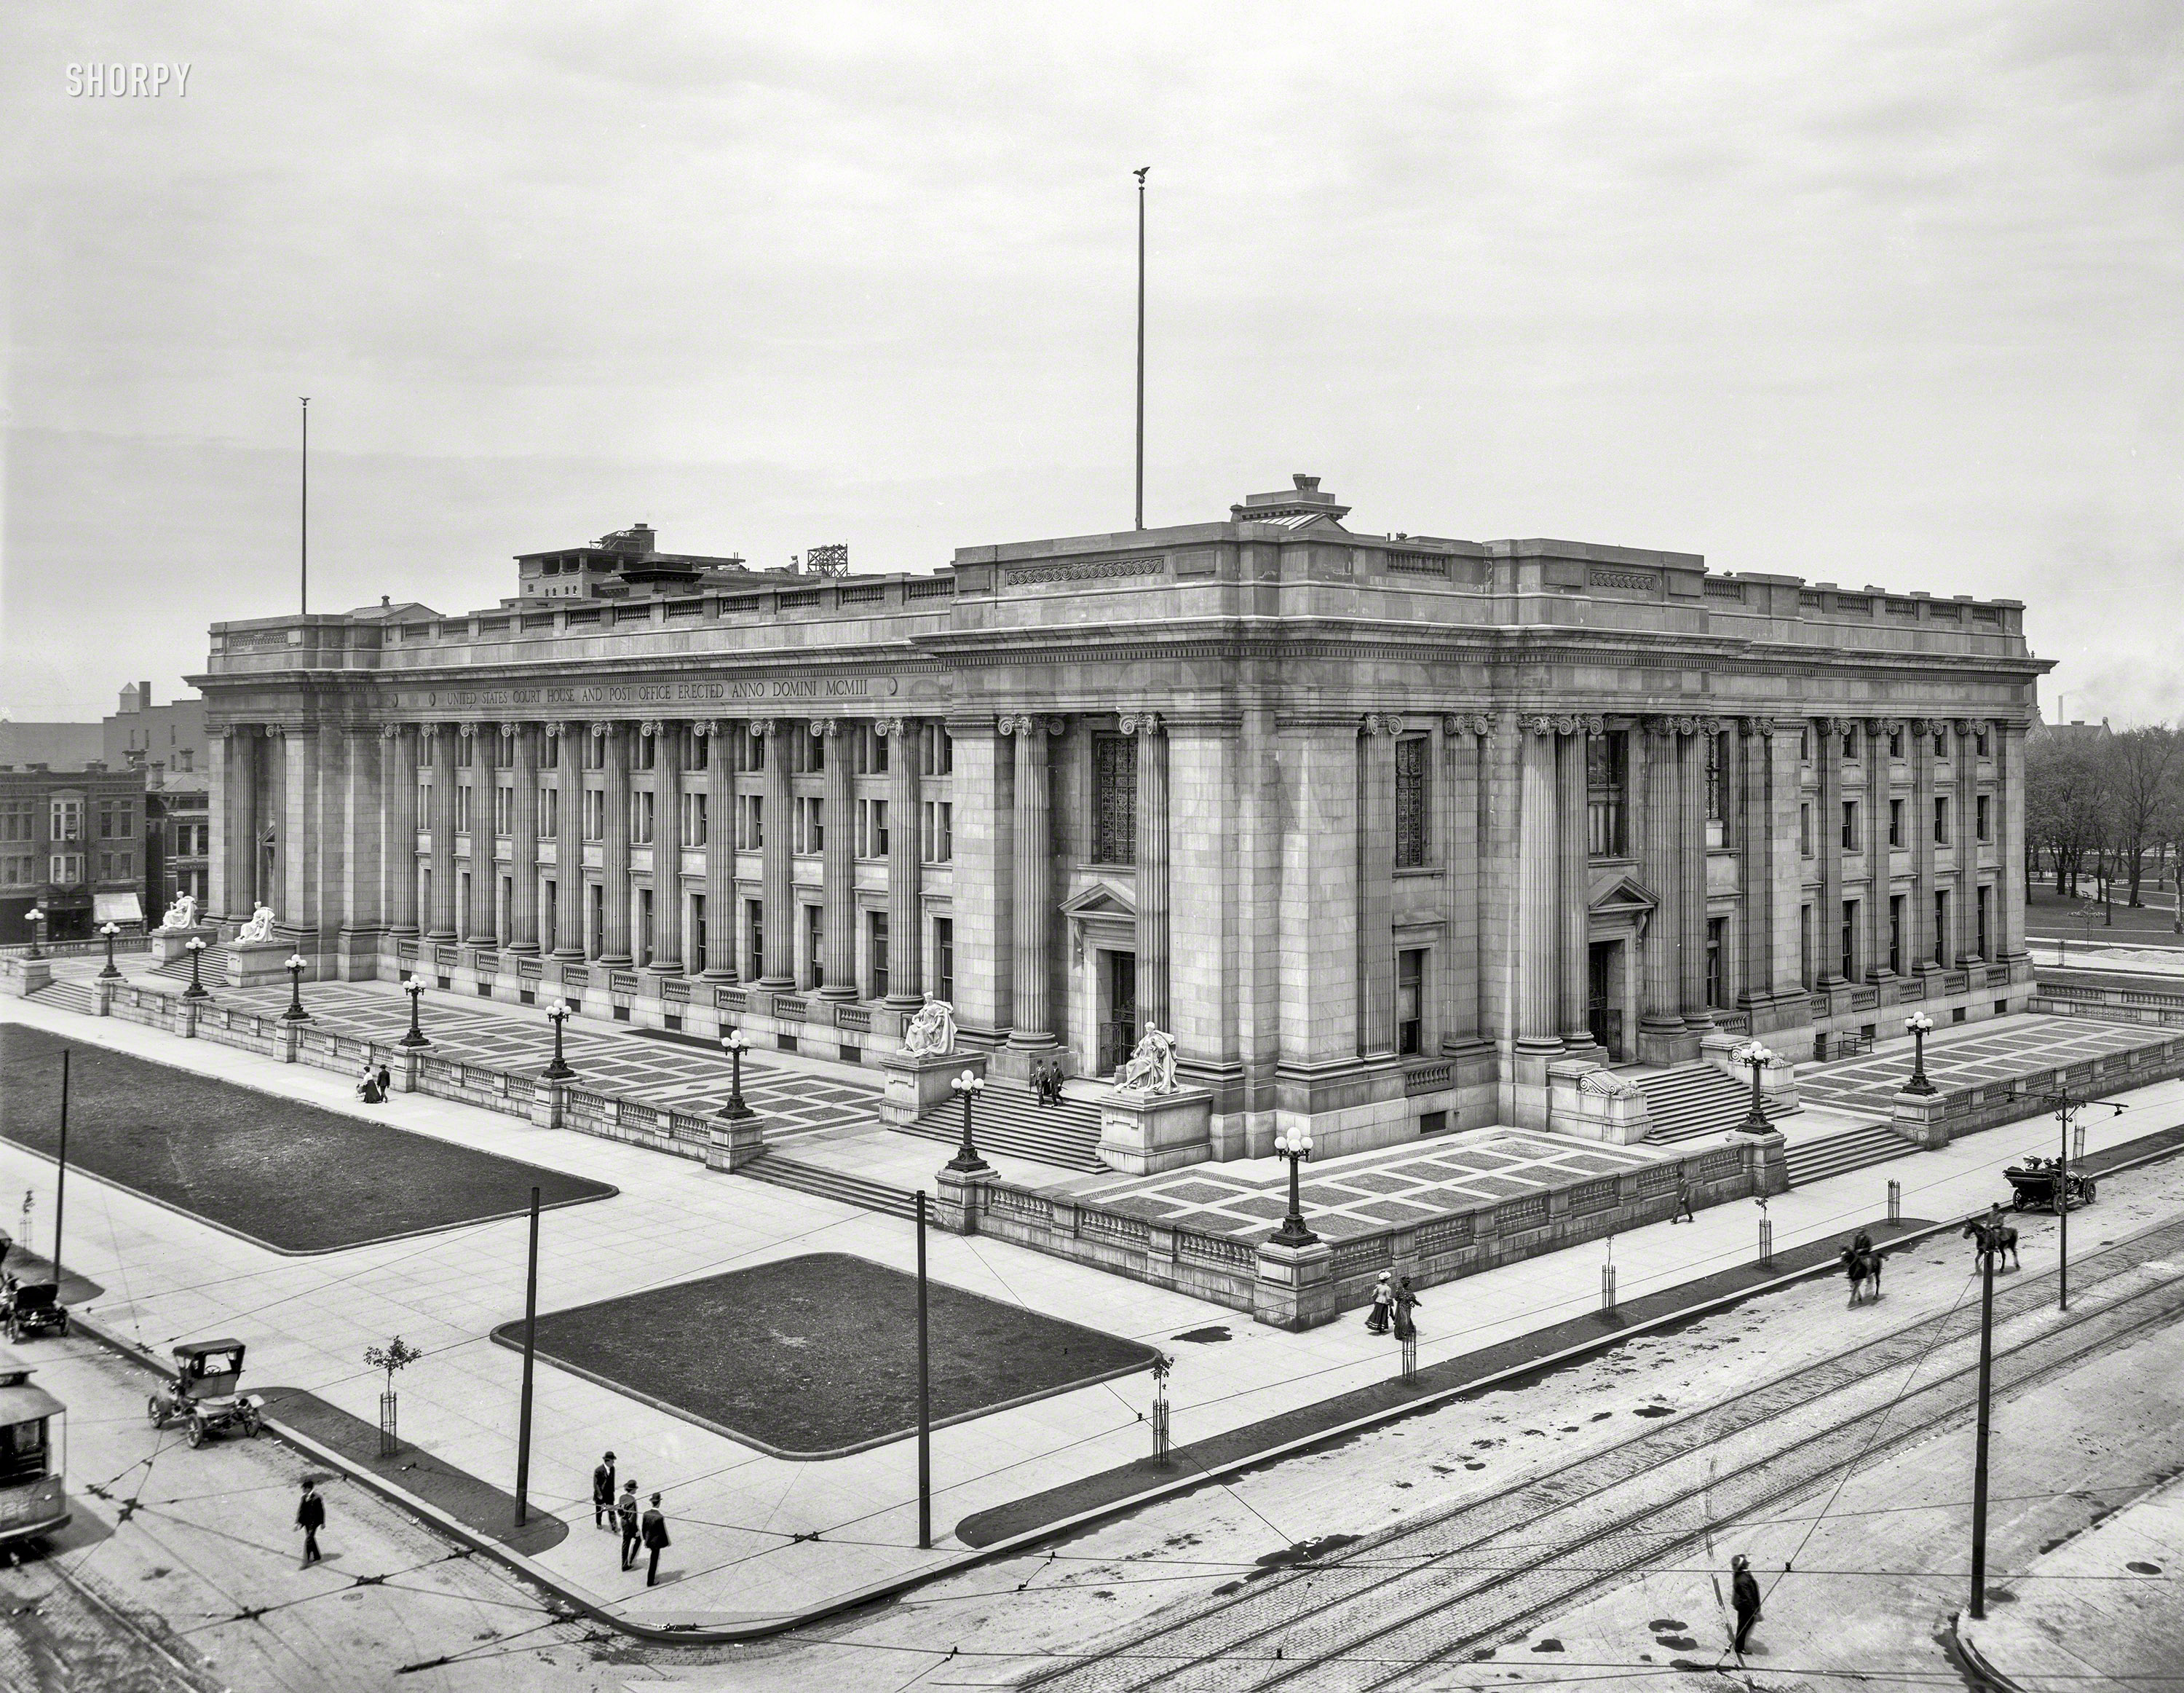 Indianapolis circa 1905. "Federal Building (Courthouse & Post Office), Ohio Street." 8x10 inch glass negative, Detroit Publishing Company. View full size.